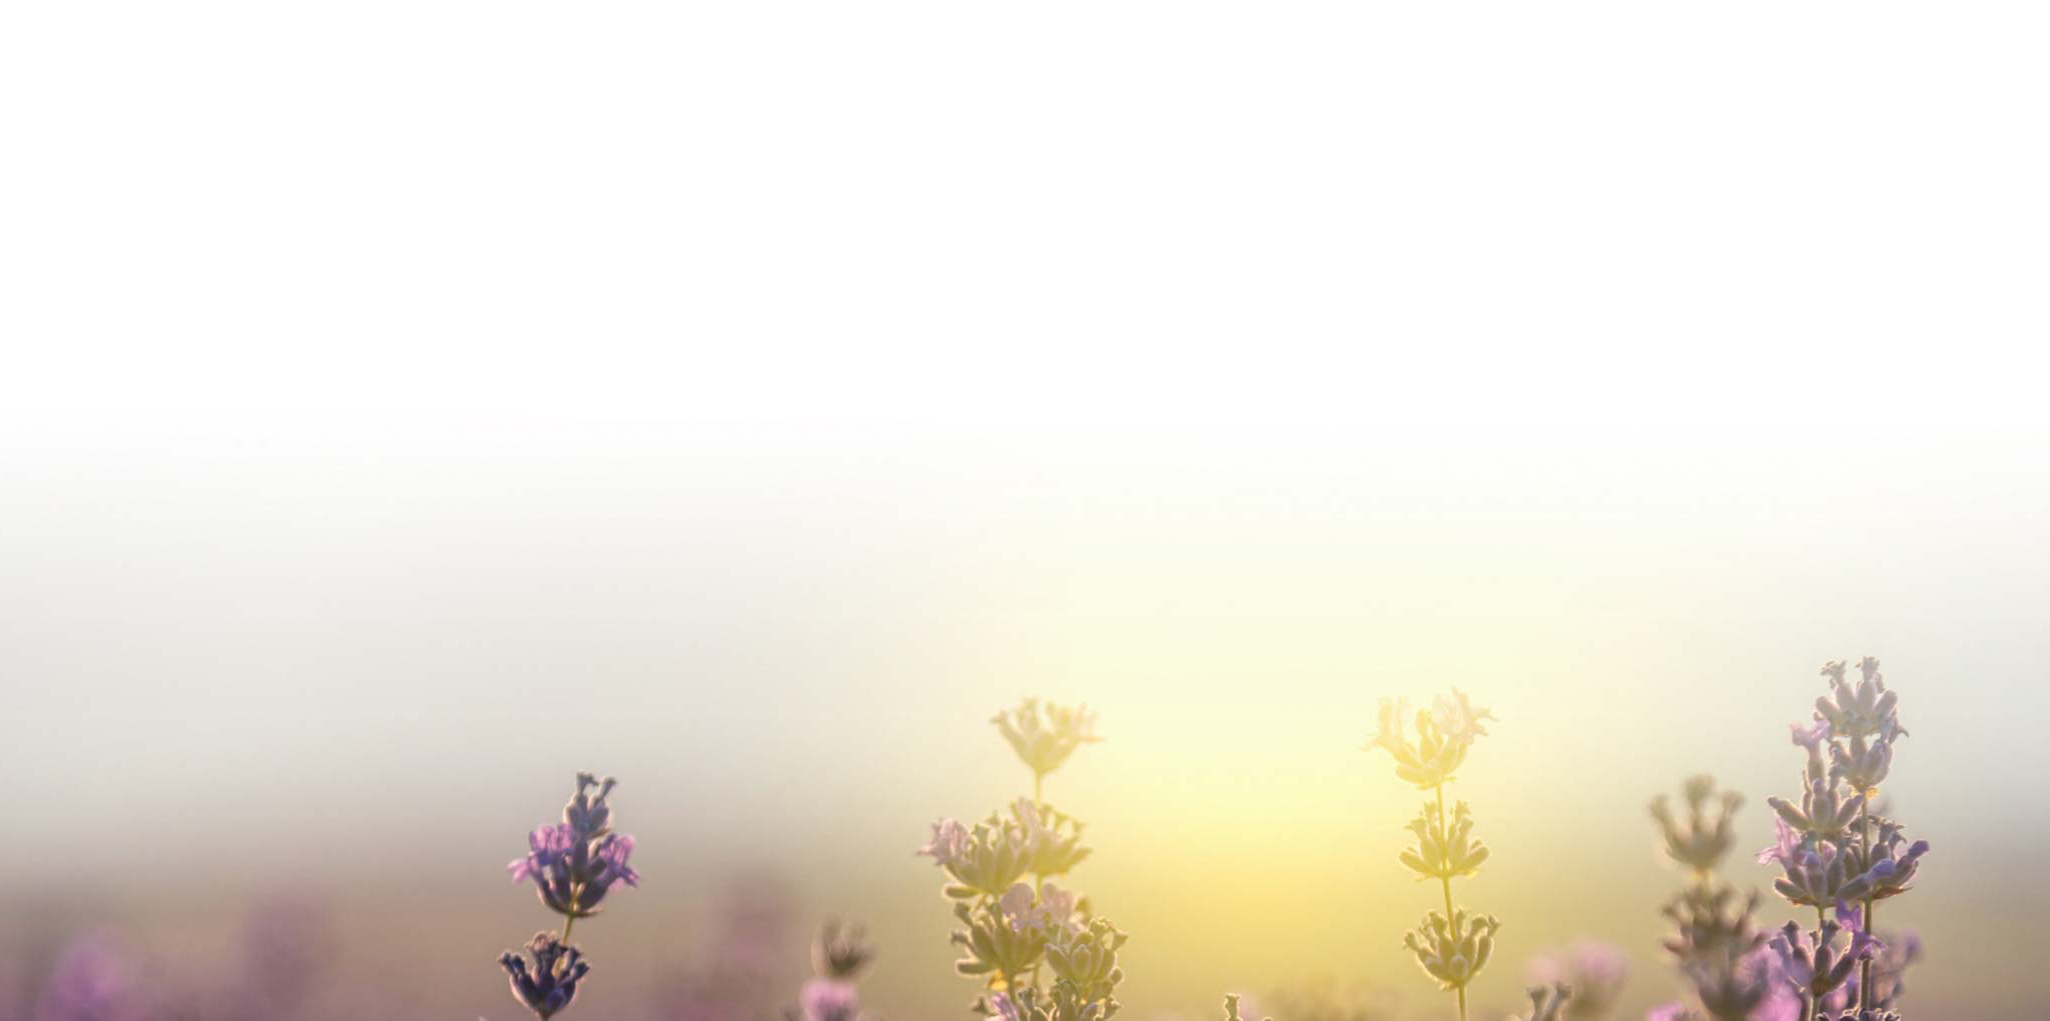 Flowers in a field during sunset